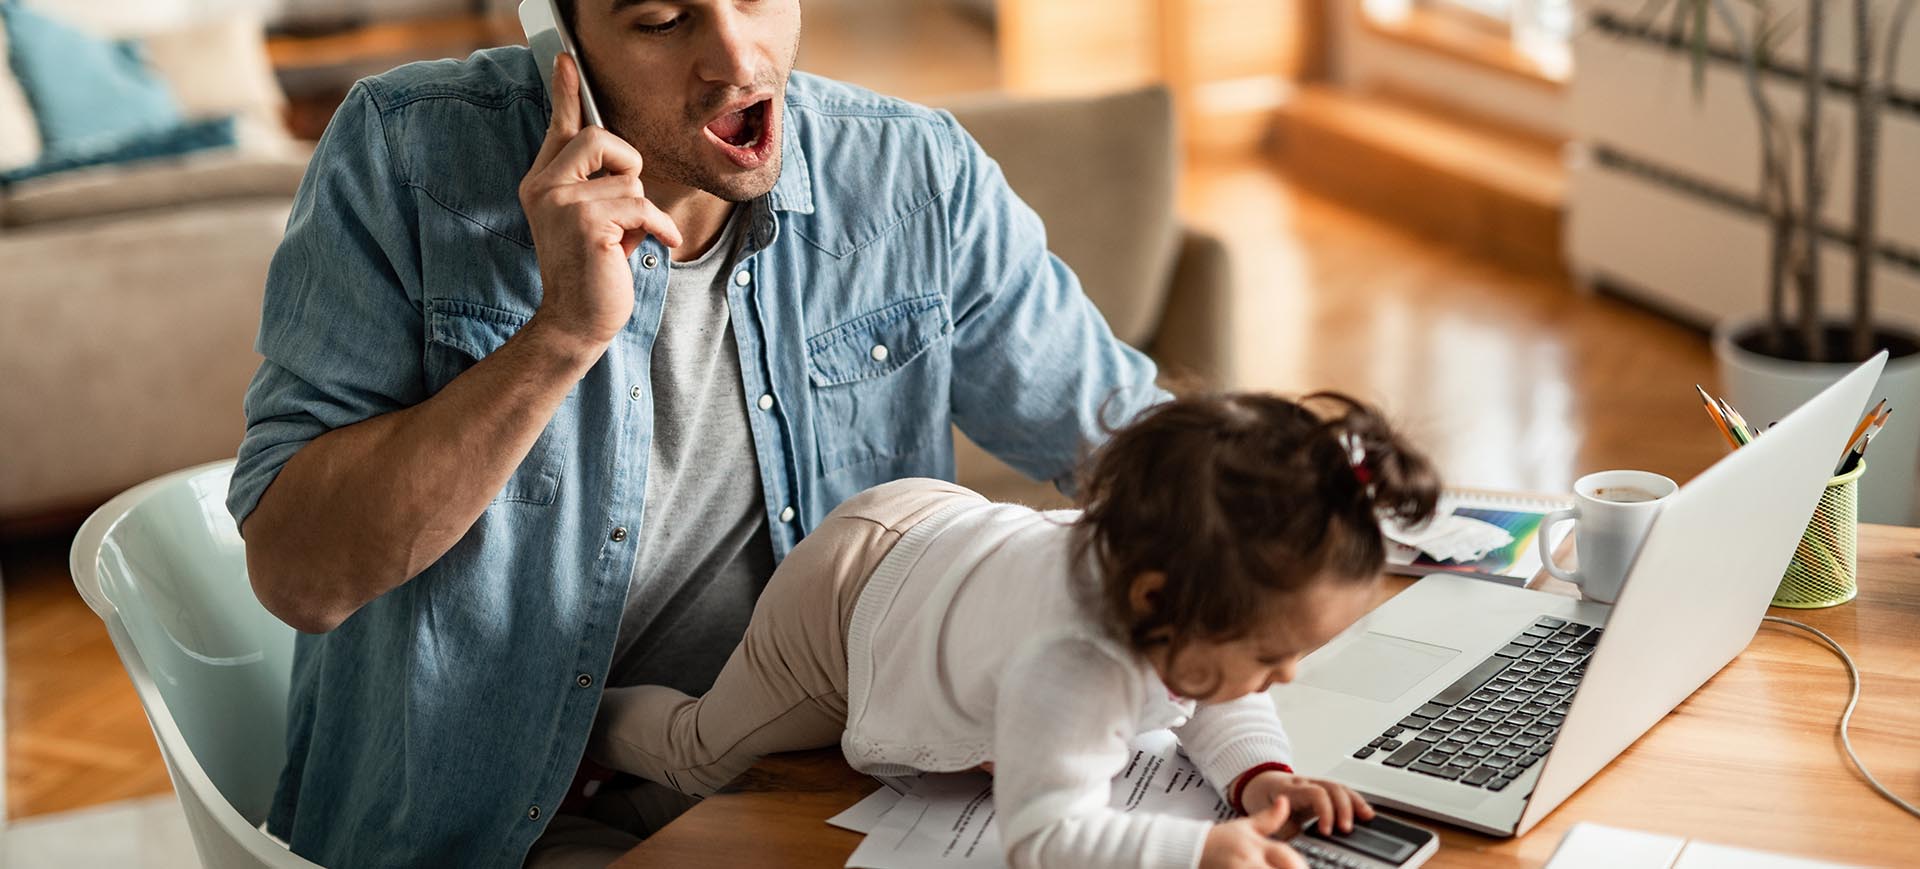 Work from home with family: is it possible?